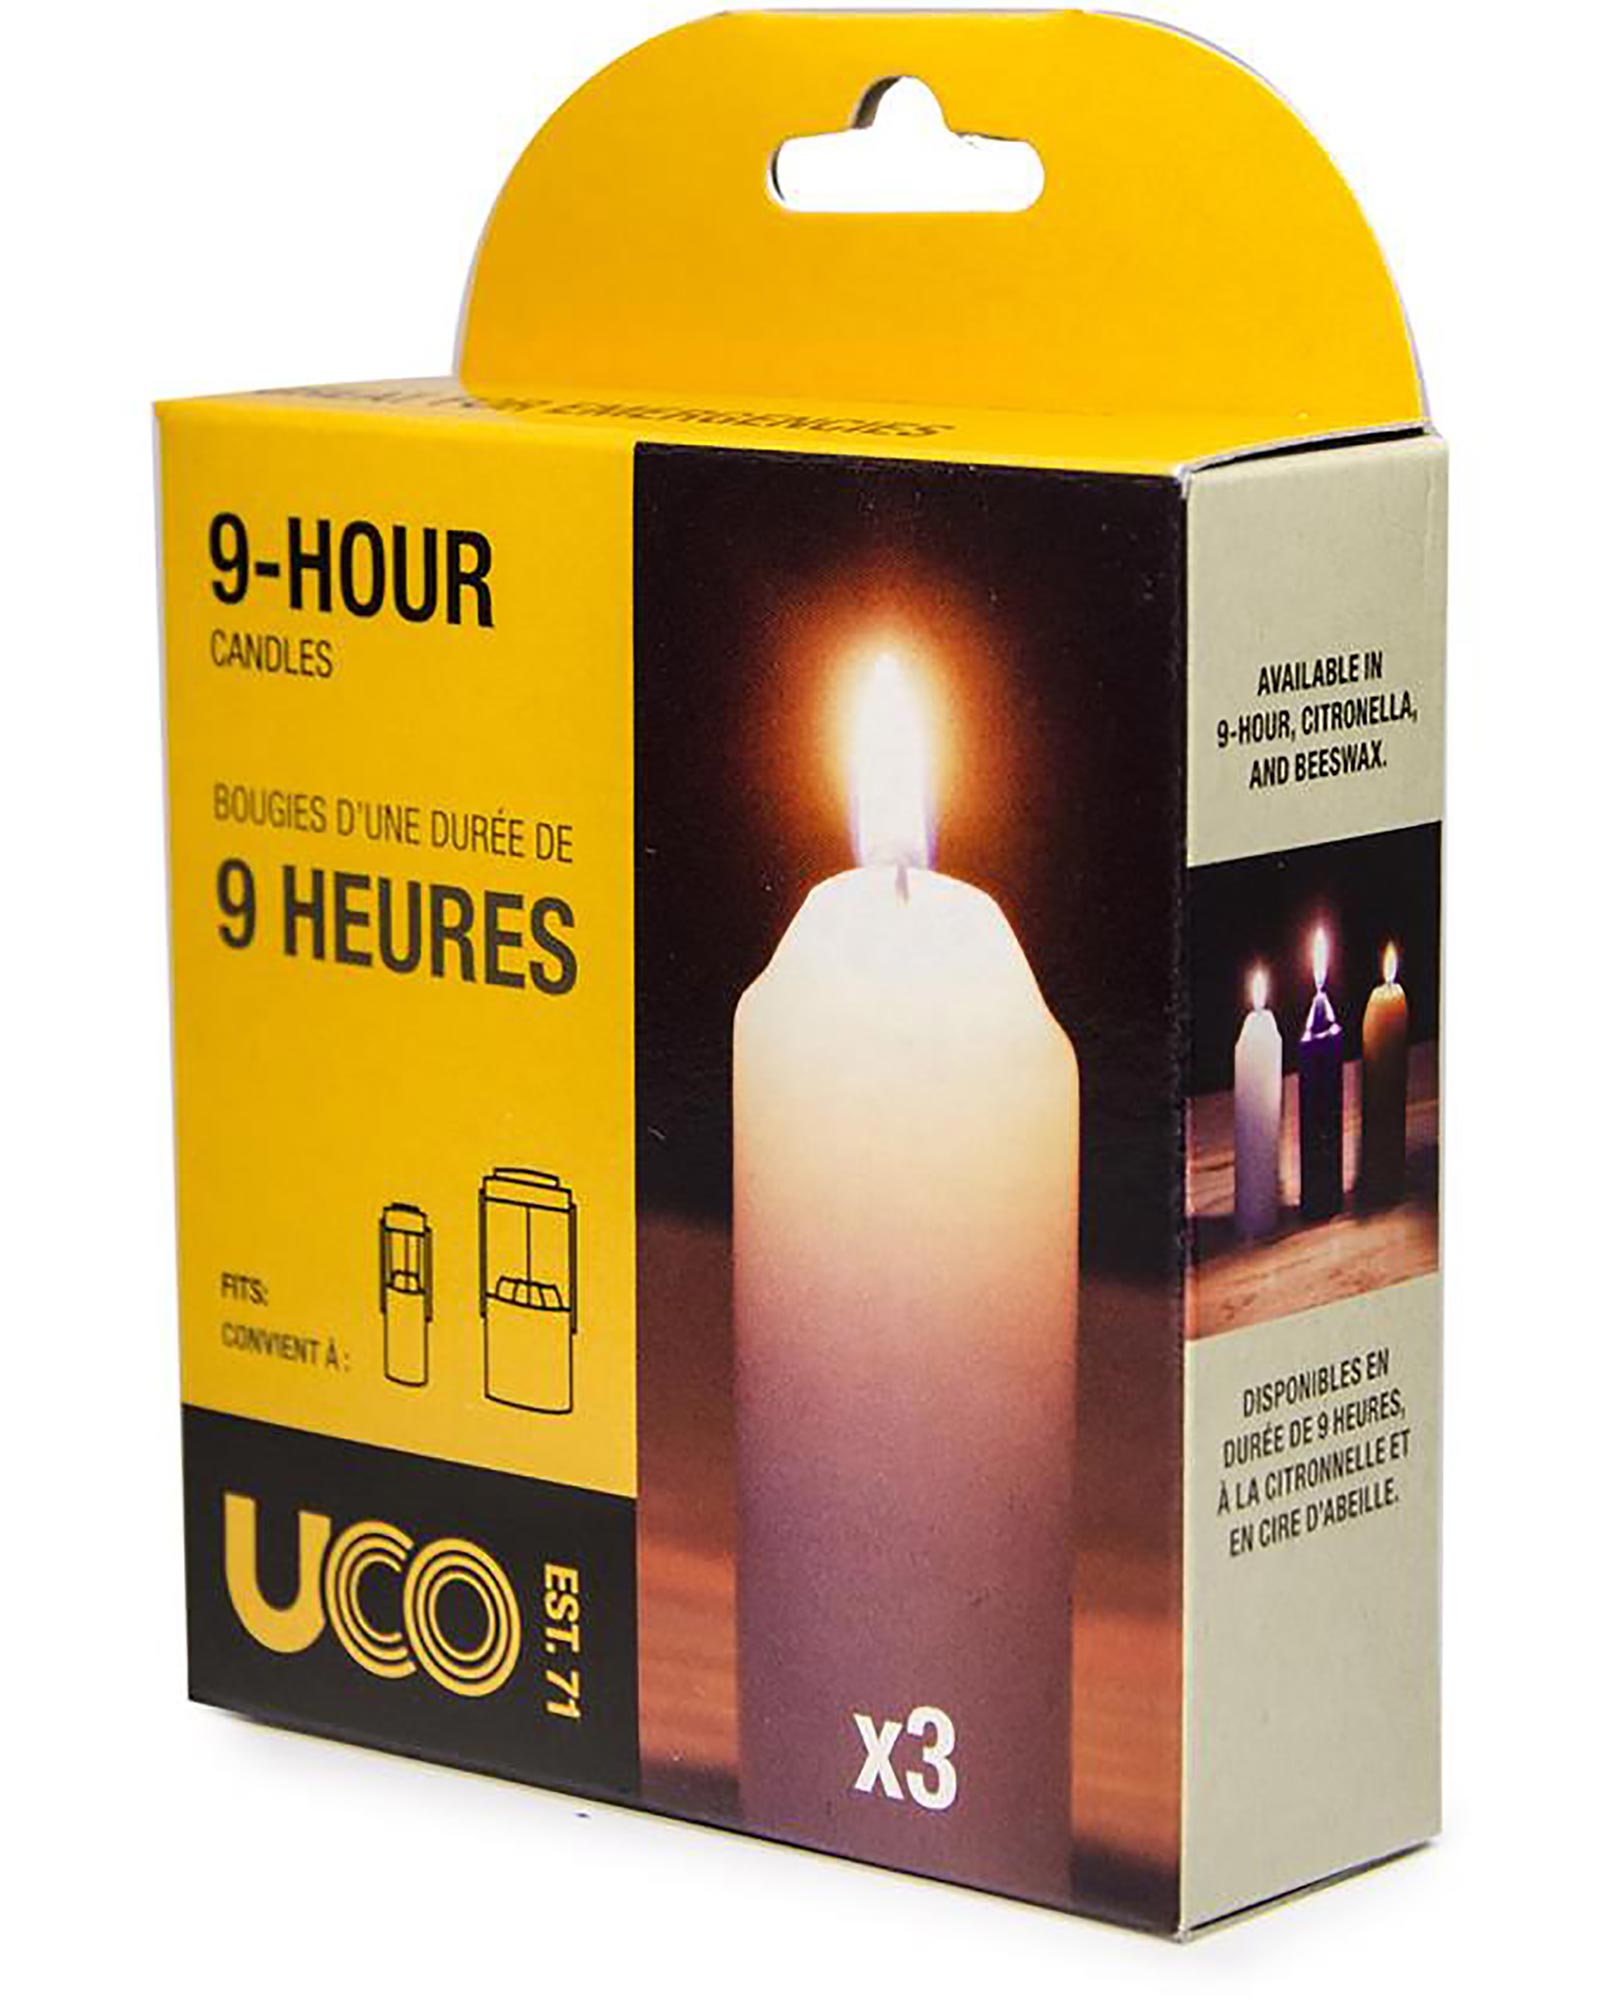 Uco 9-hour Candles 3pk